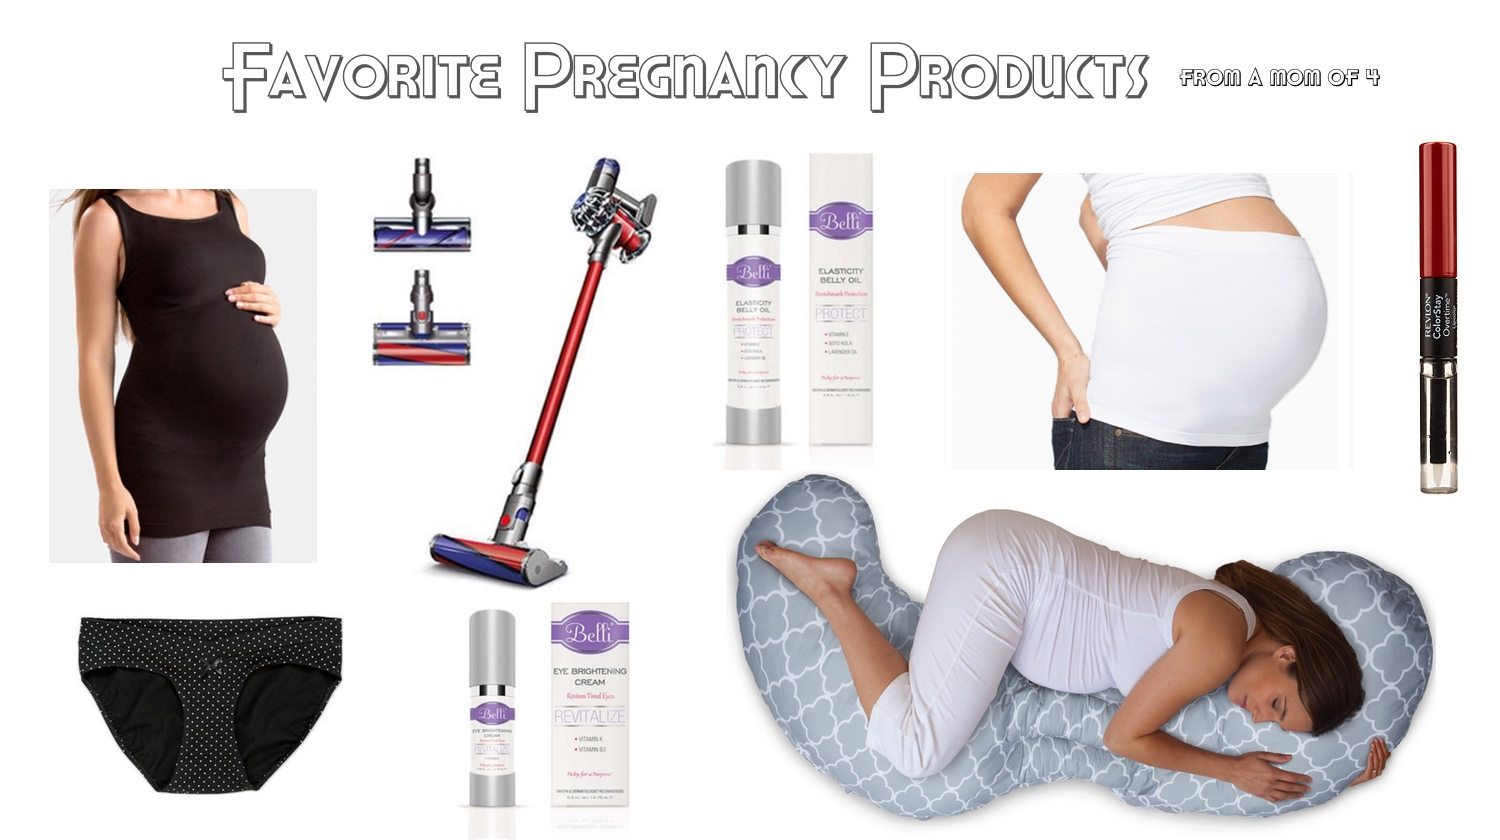 Favorite Pregnancy Products